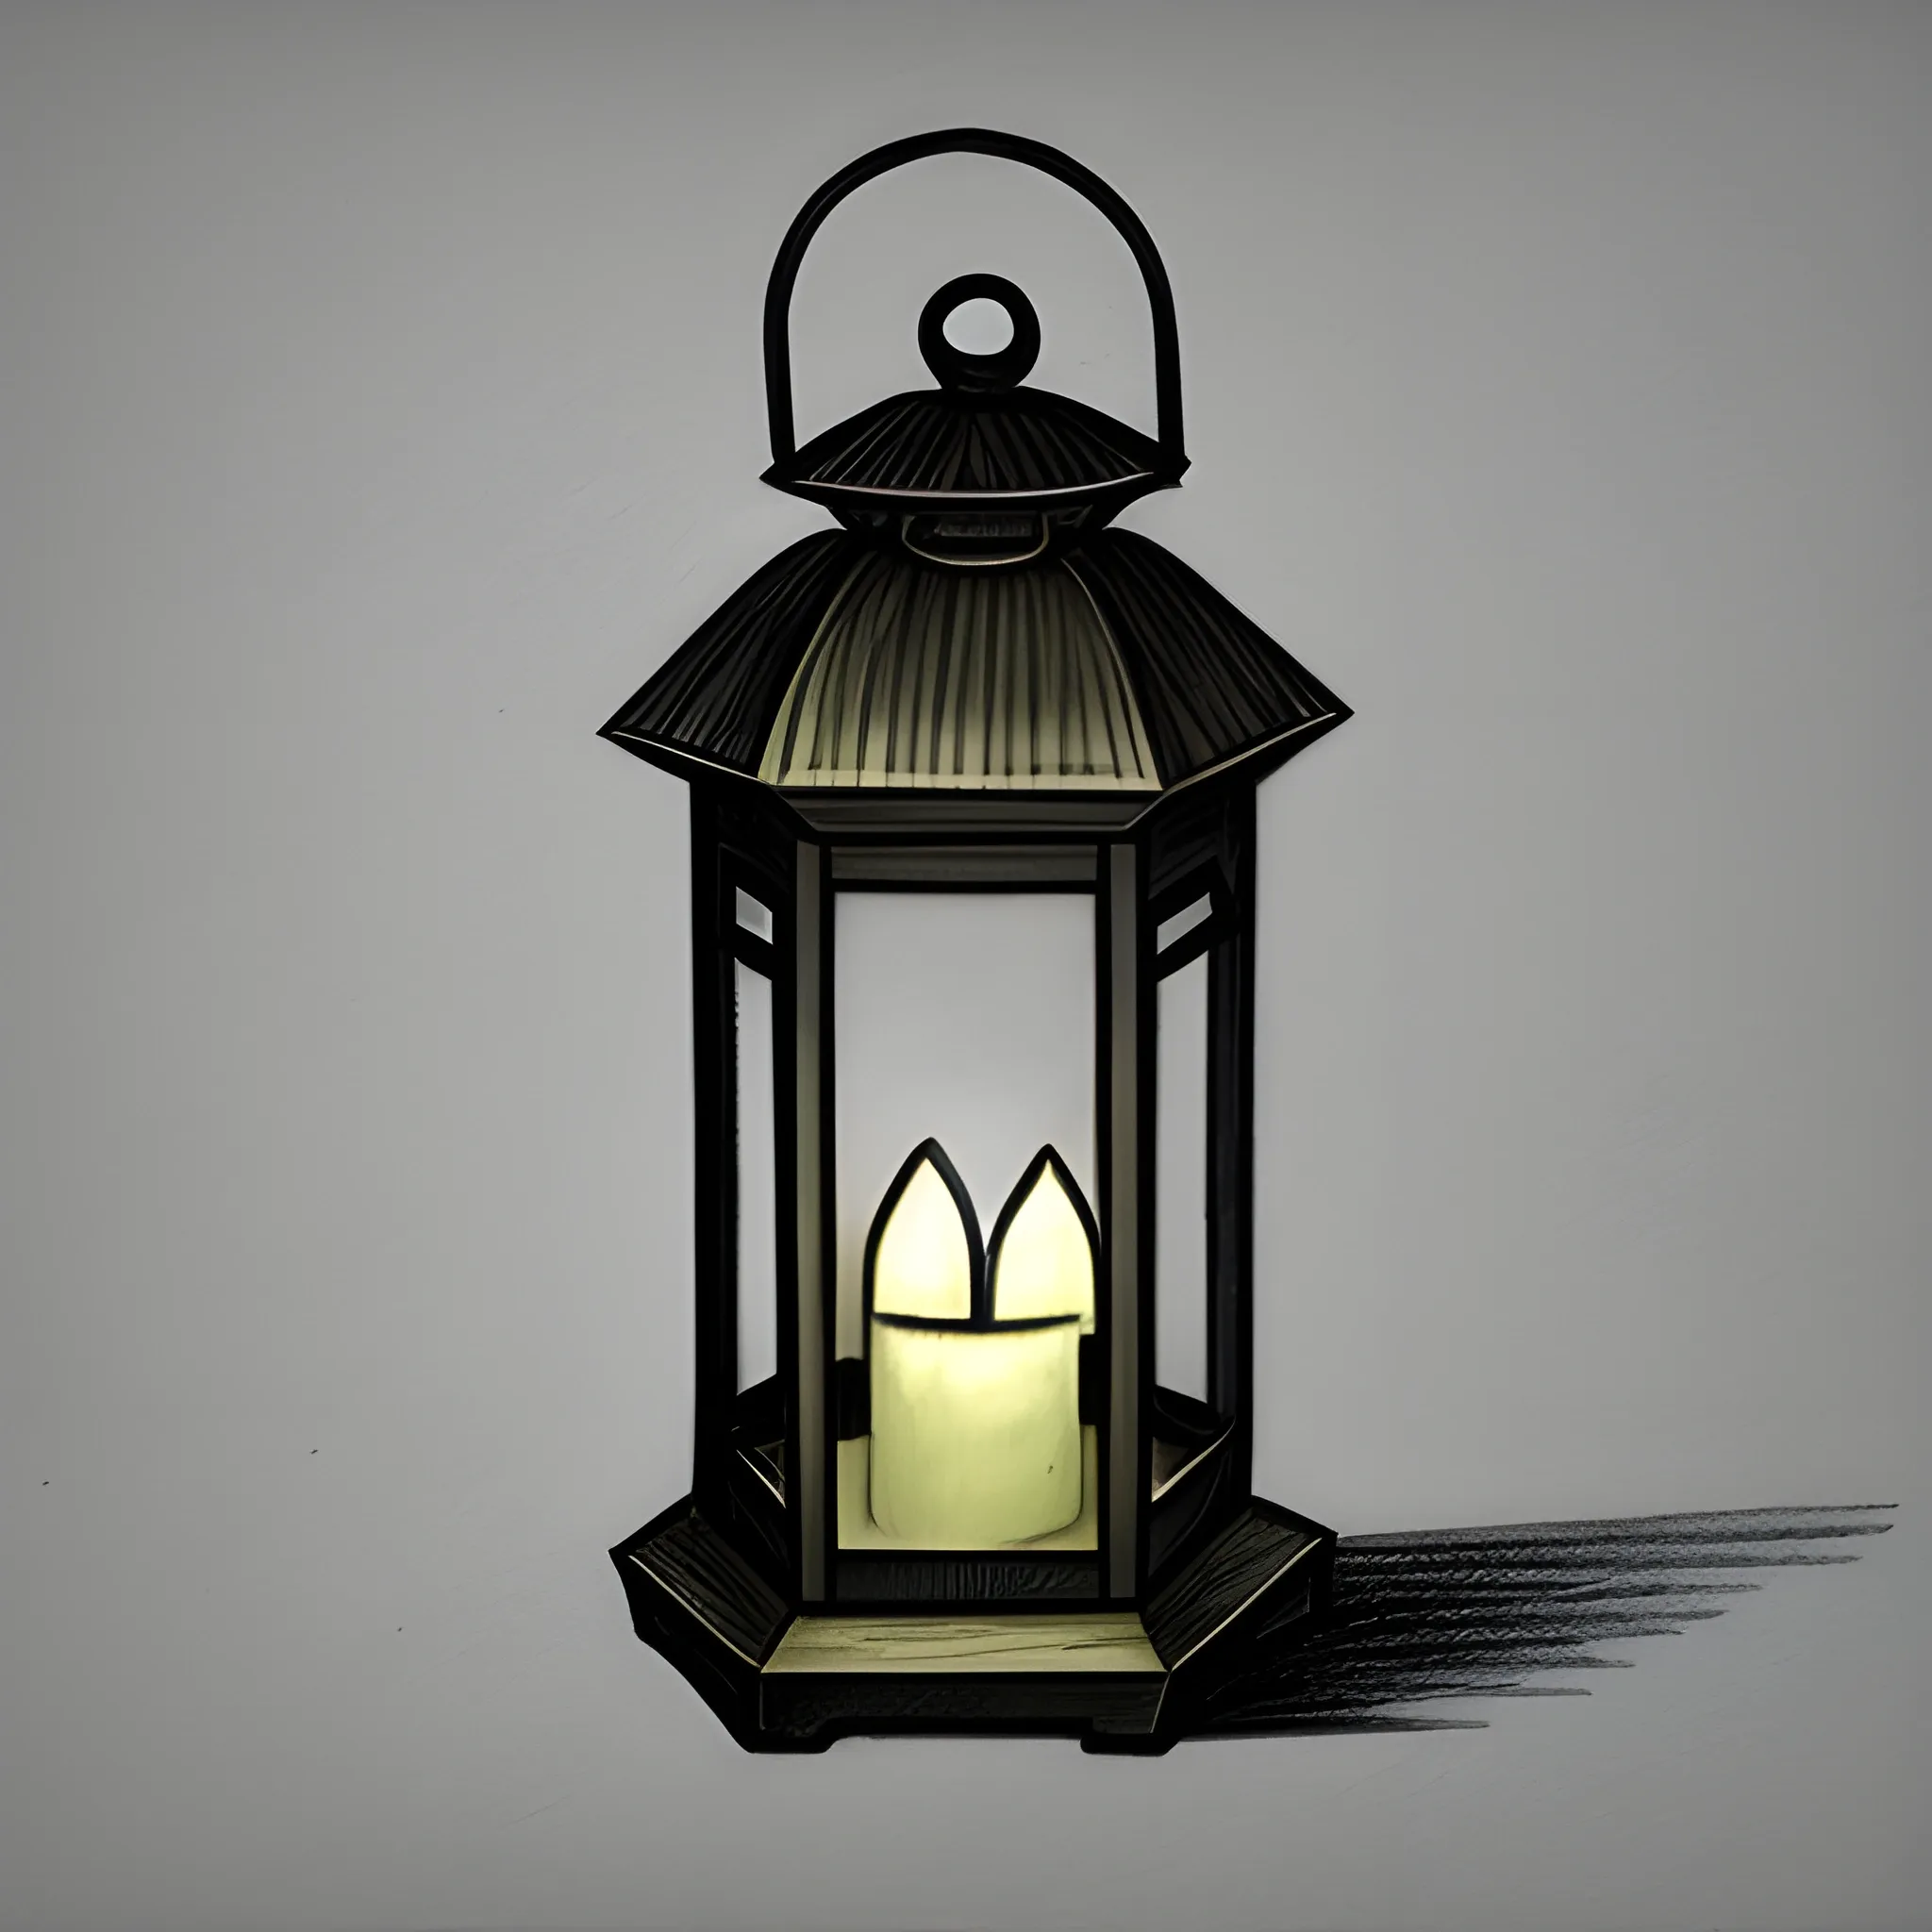 How To Draw A Lantern In 8 Easy Steps